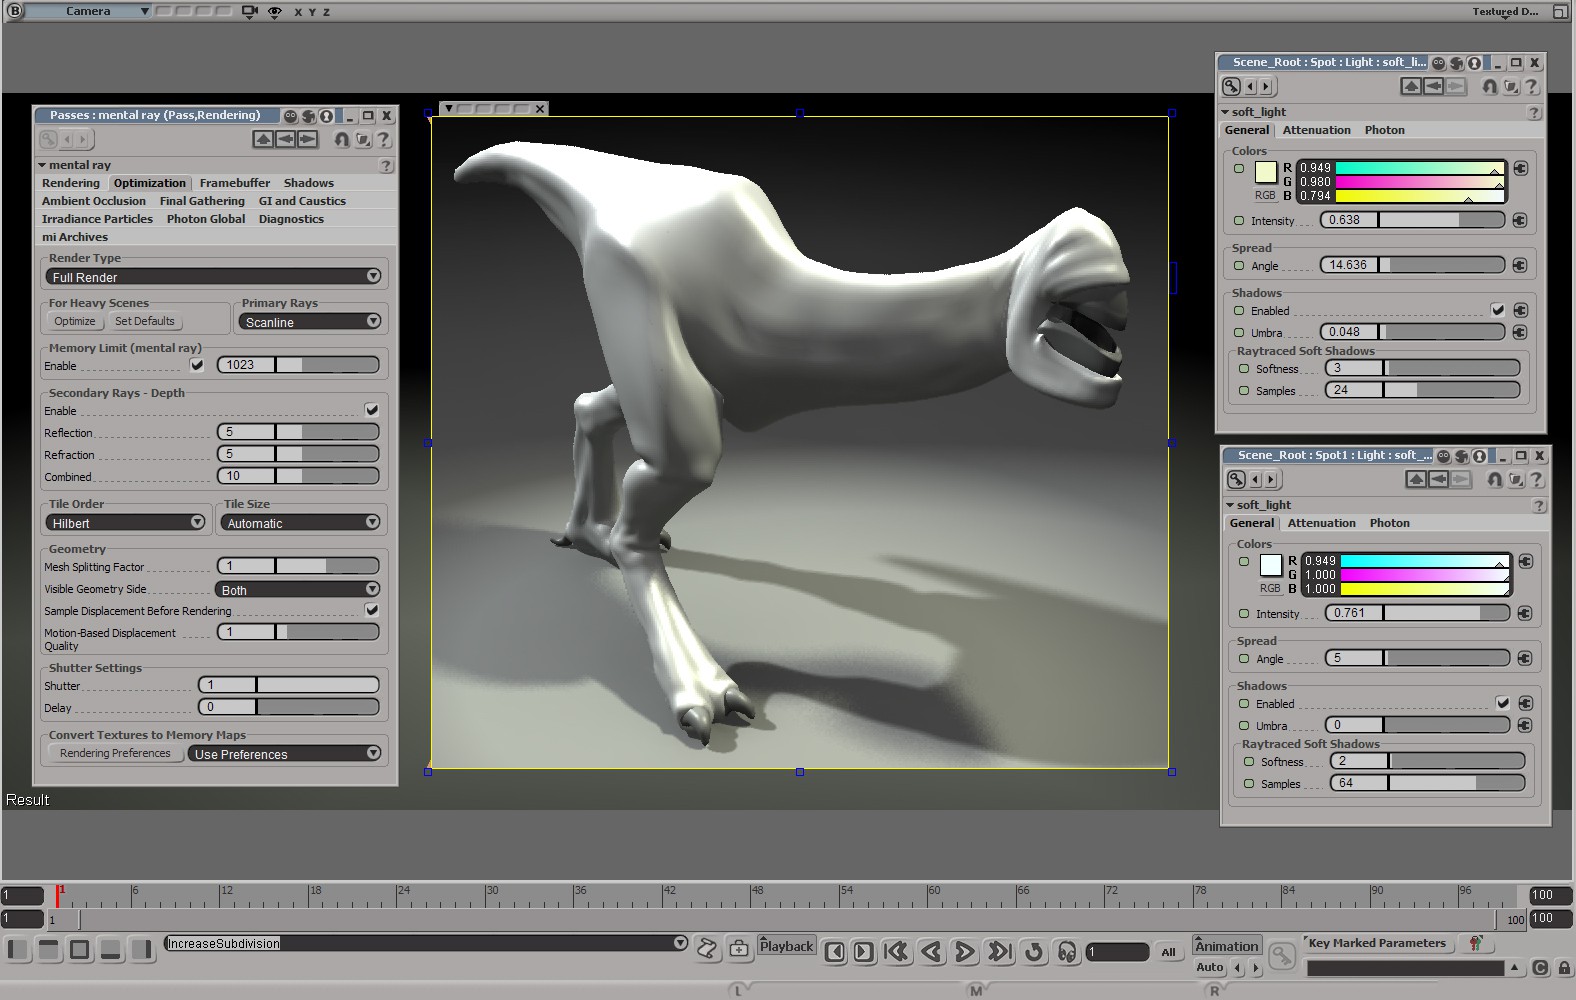 softimage 3d software